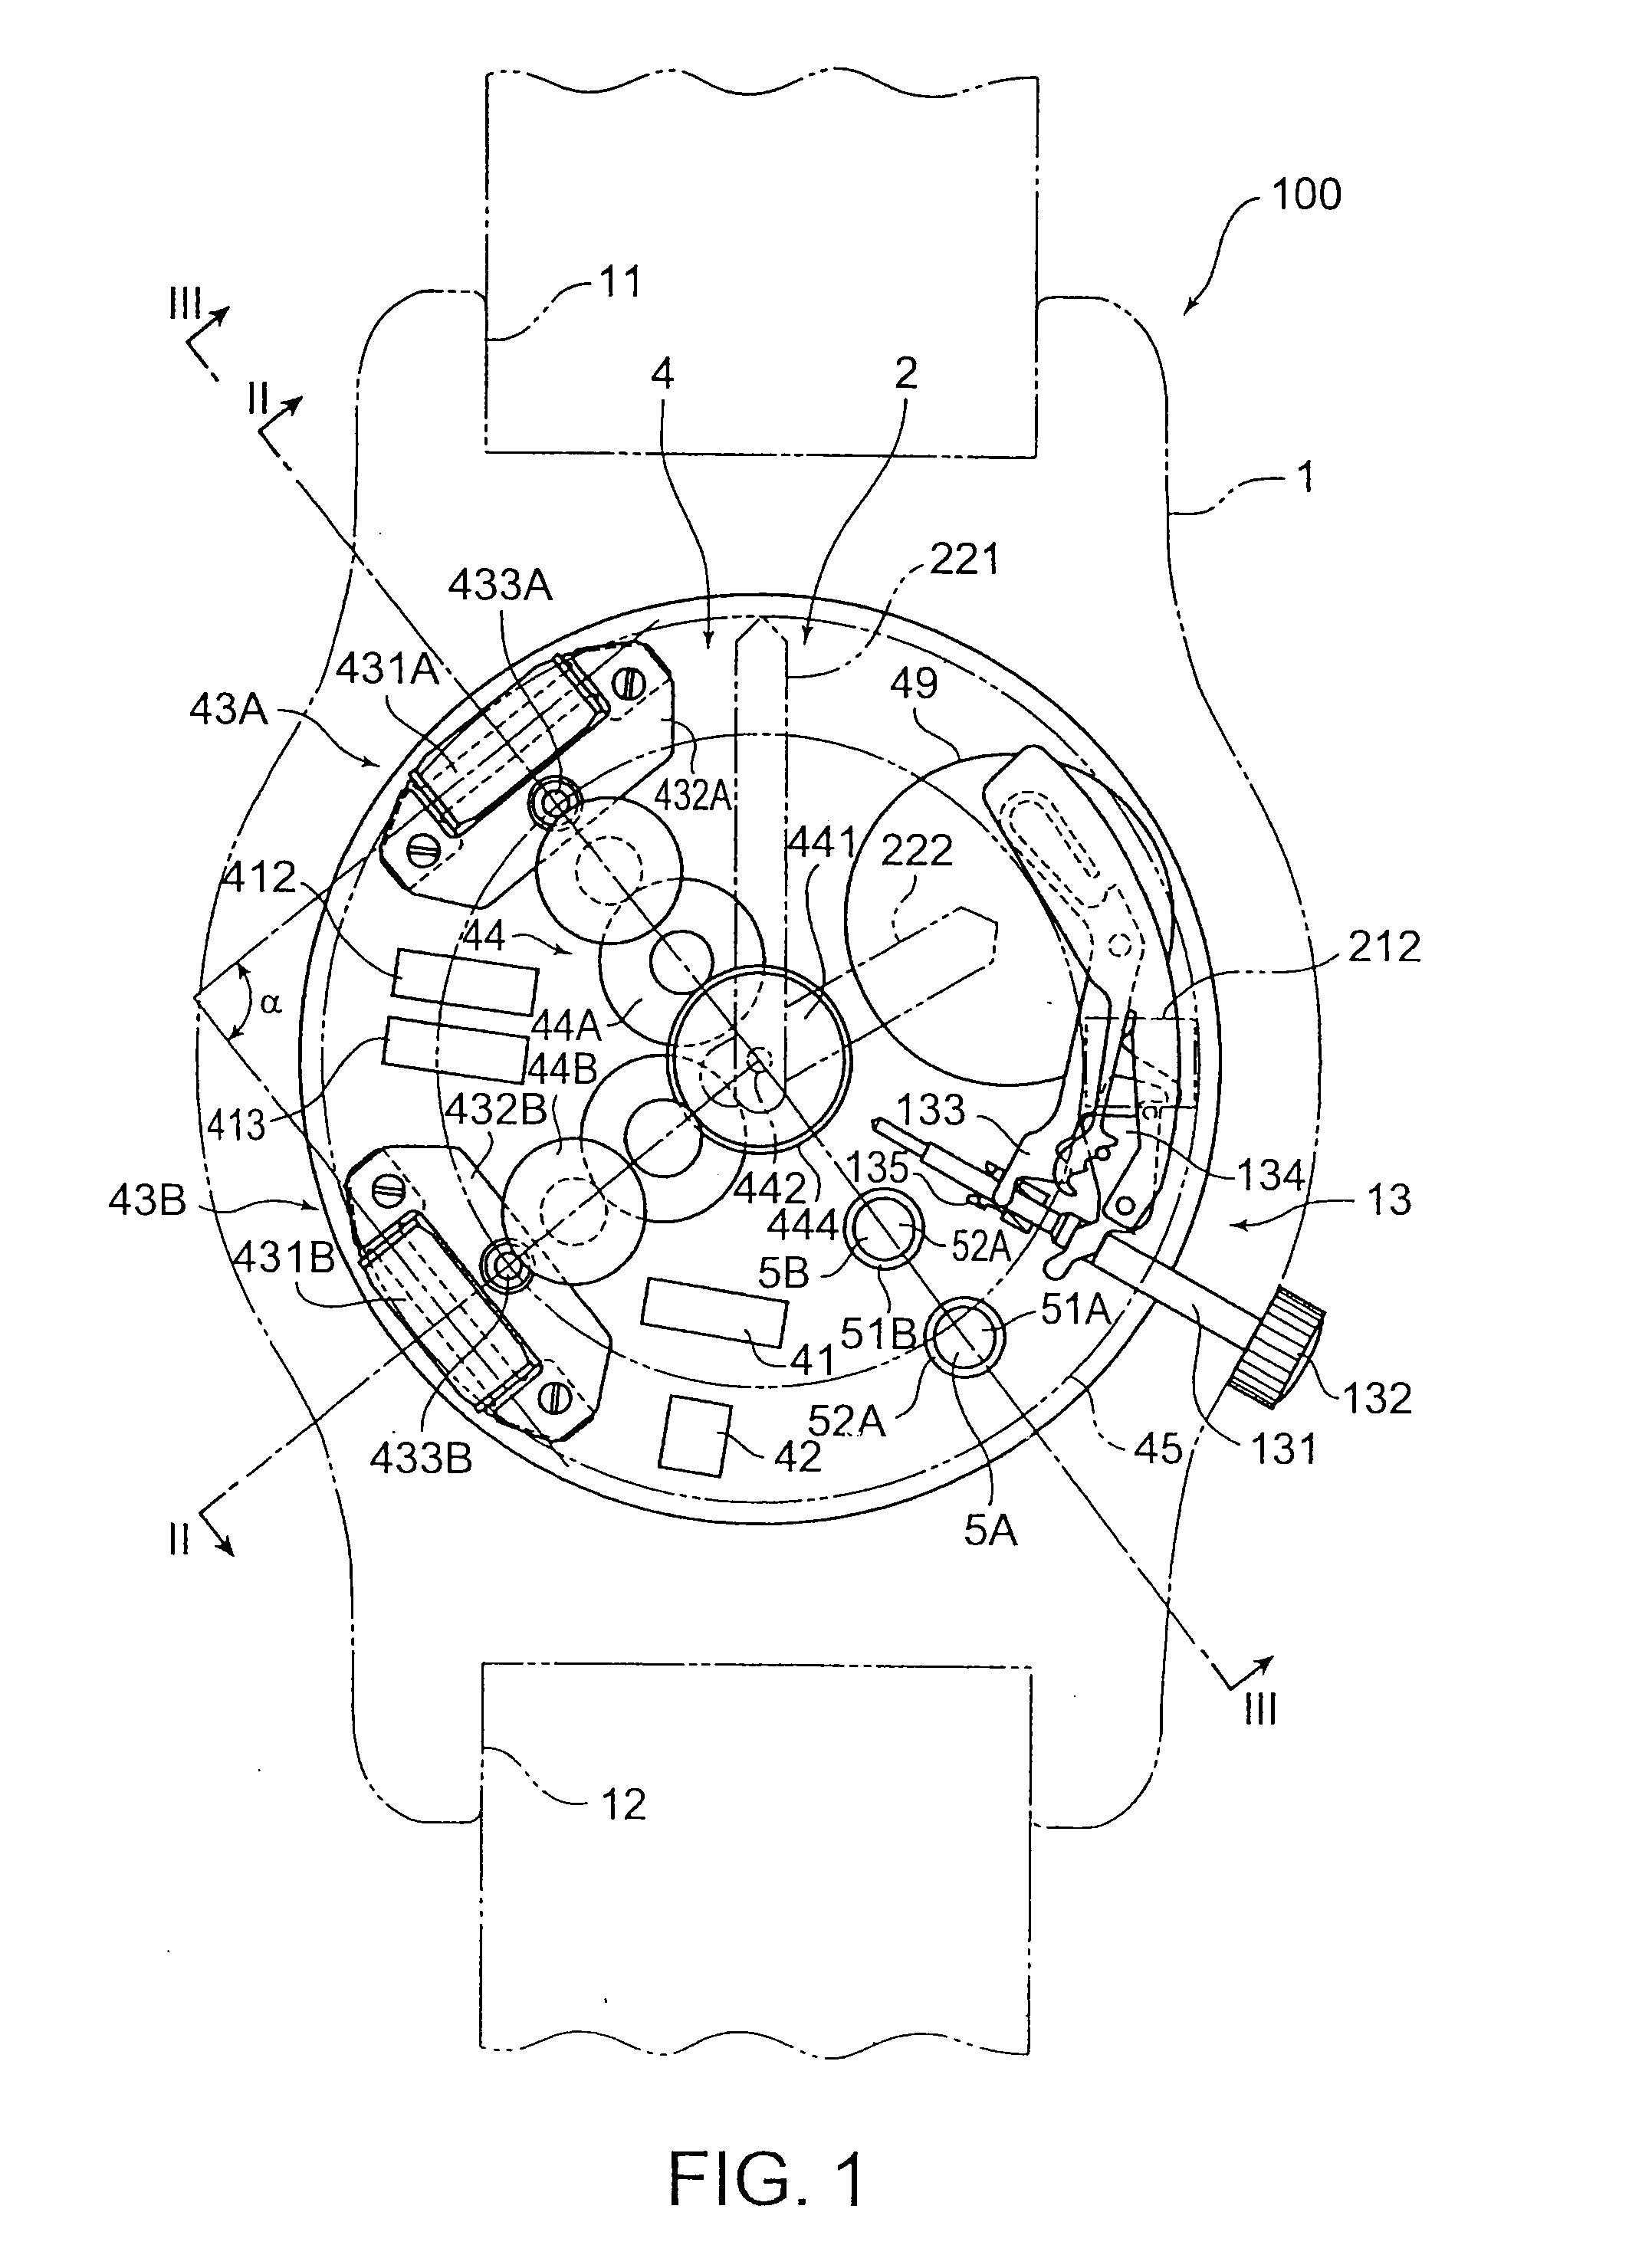 Electronic Timepiece with Wireless Information Function